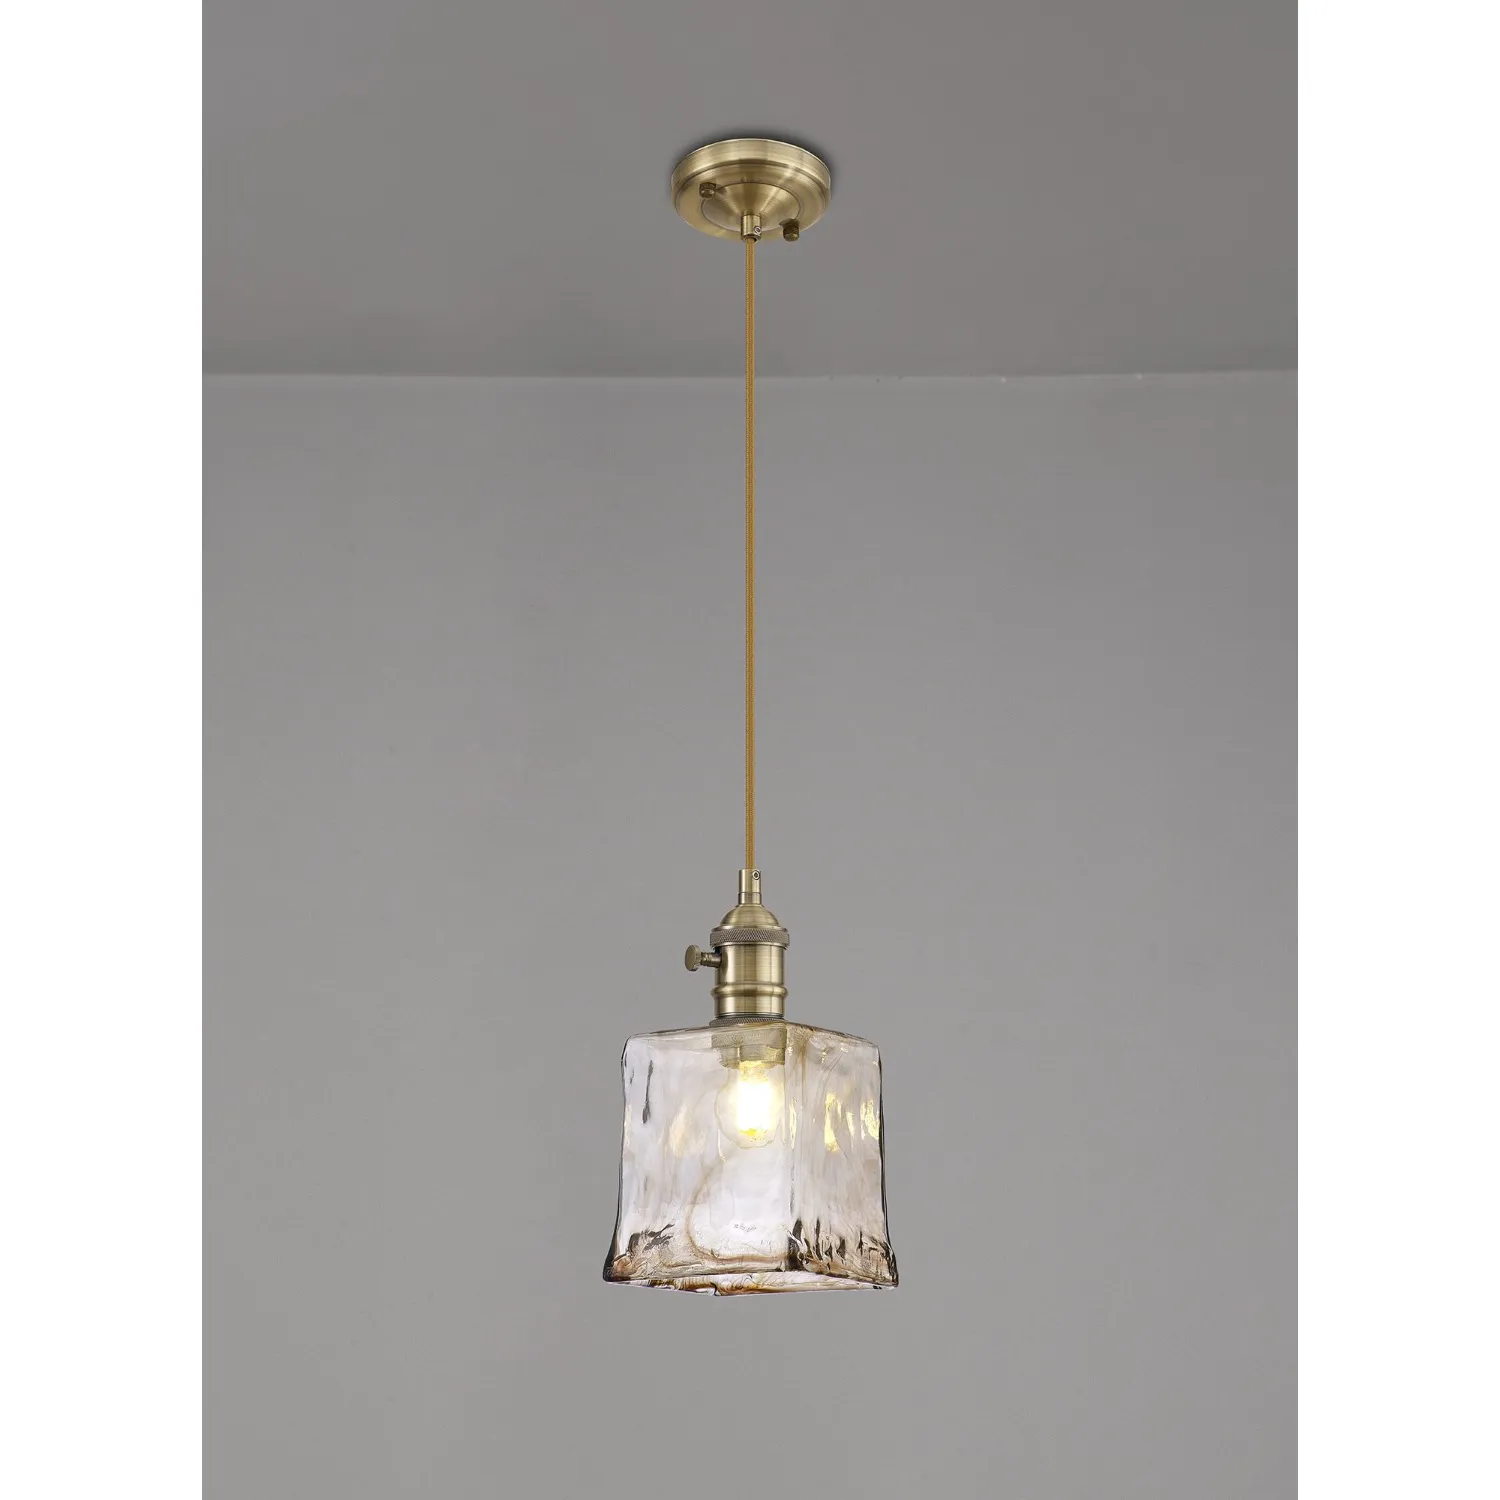 Hatfield Switched Pendant 1.5m, 1 x E27, Antique Brass Golden Brown Braided Cable Brown Square Glass